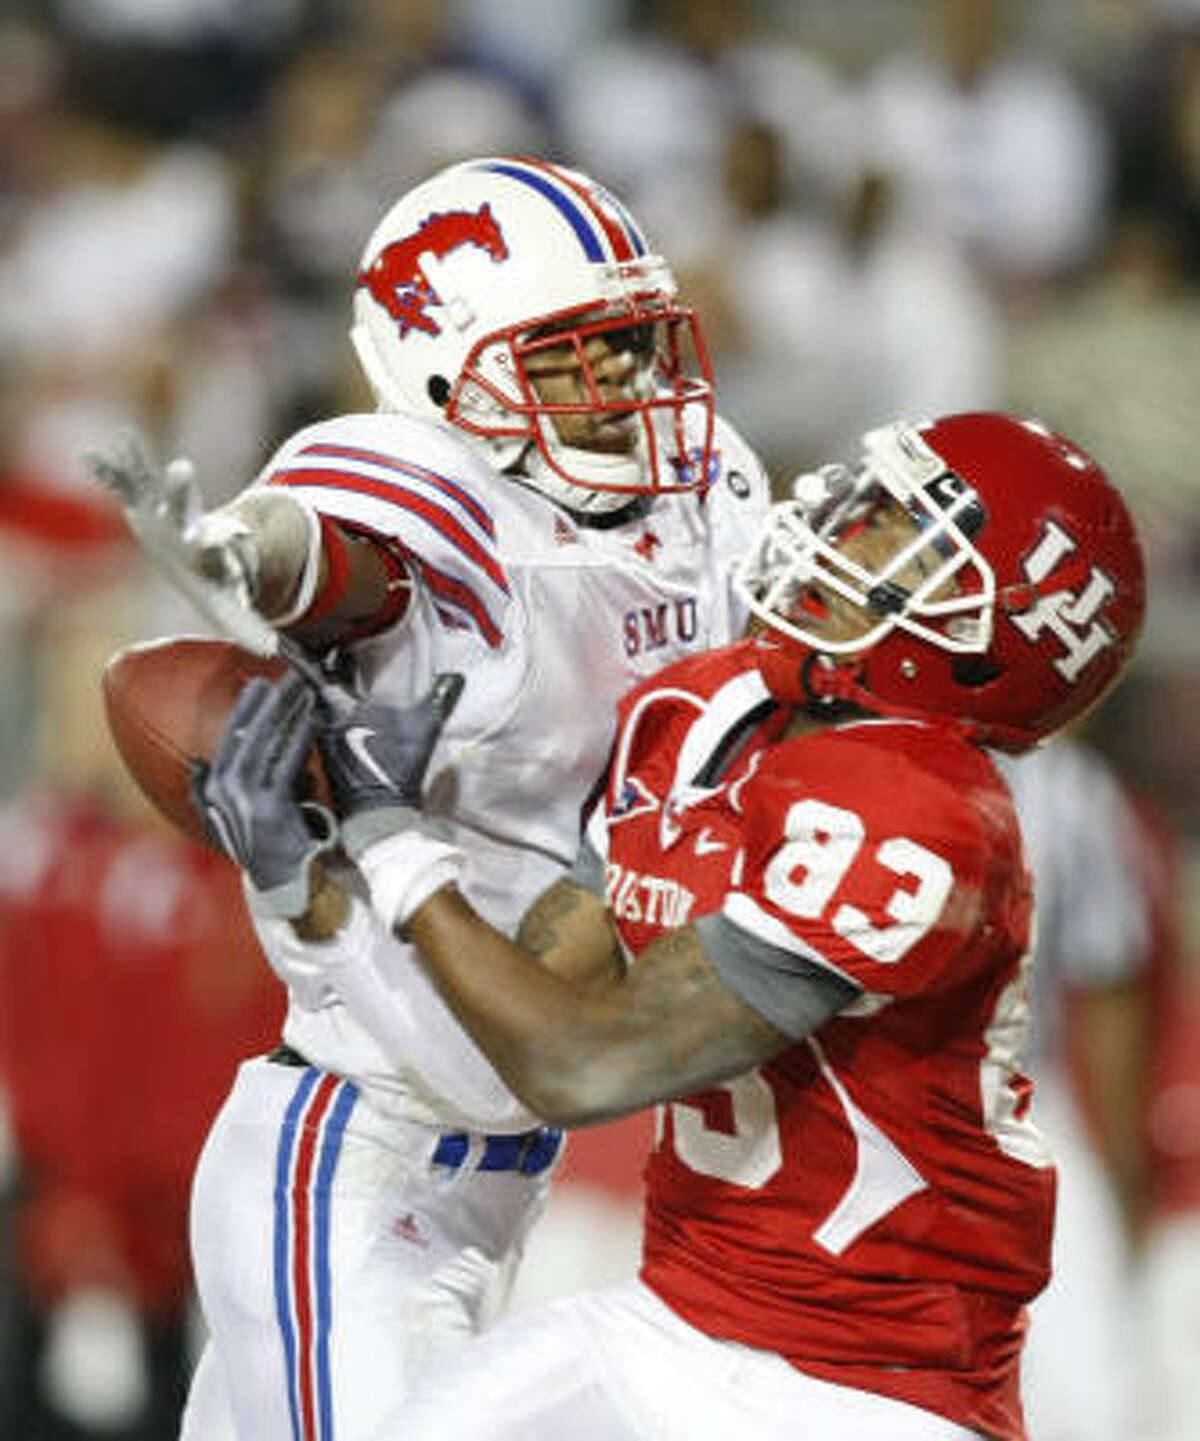 SMU cornerback Bryan McCann is called for interference as Houston wide receiver Patrick Edwards tries to make a play in the third quarter.